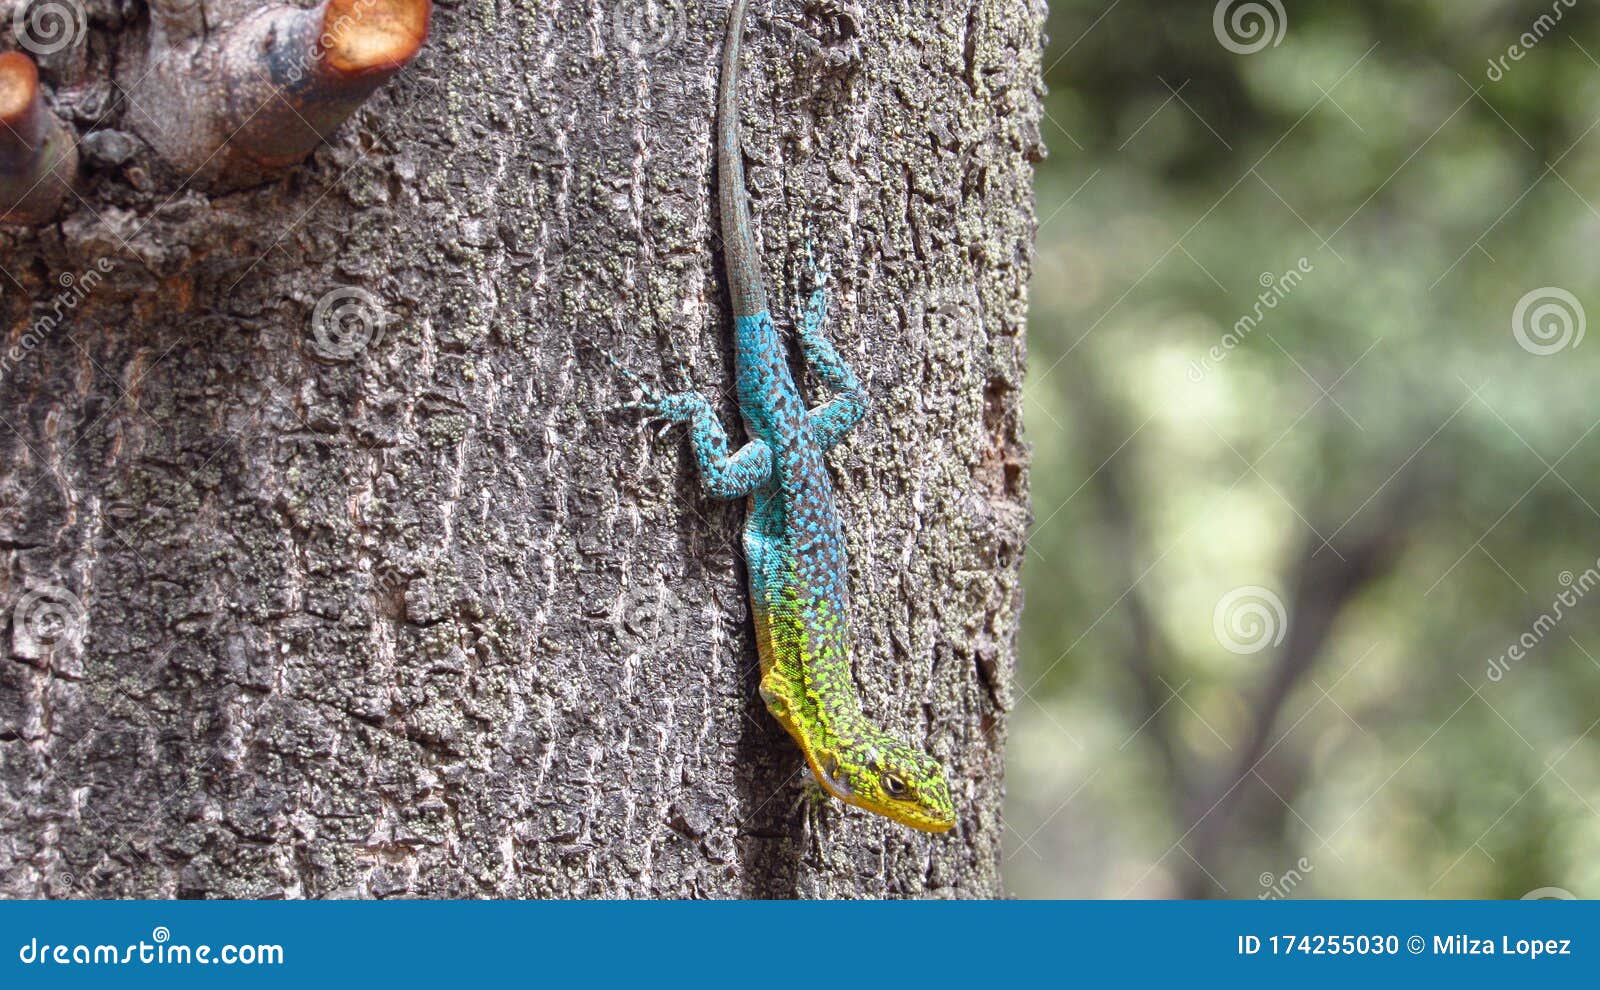 wild colorful lizard on a tree in a nature reserve in chile